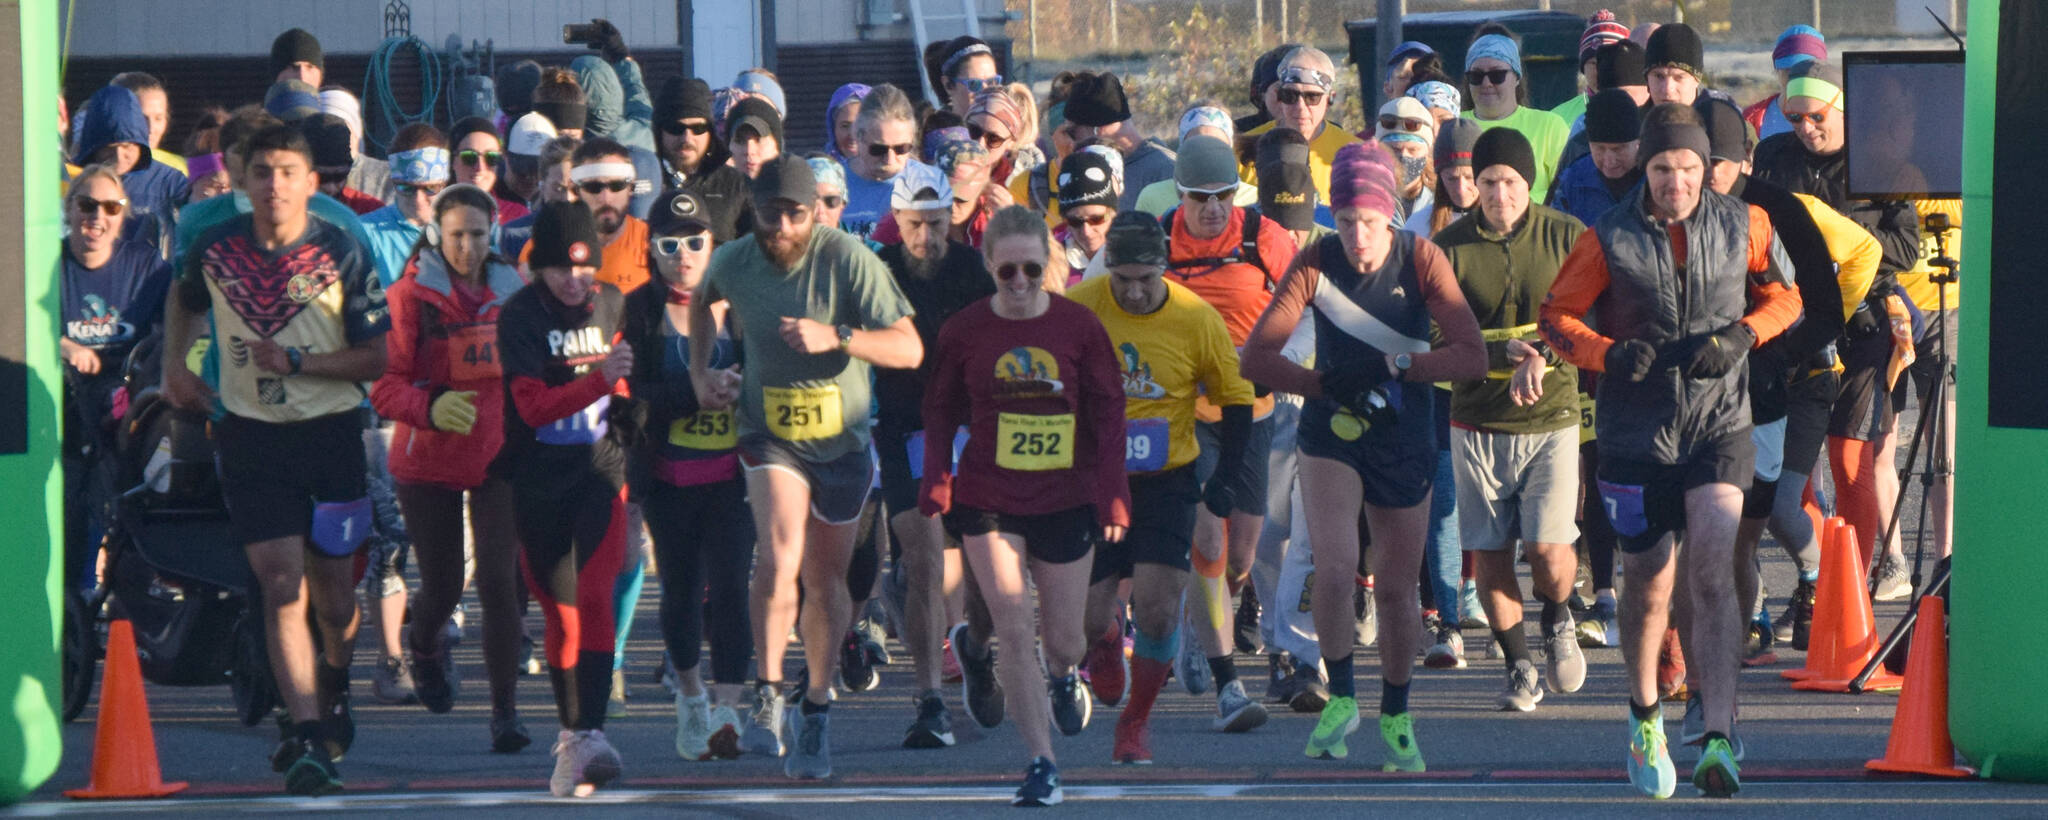 Author Kathleen Sorensen (252) and the rest of the field take off from the starting line at the Kenai River Marathon on Sunday, Sept. 26, 2021, in Kenai, Alaska. (Photo by Jeff Helminiak/Peninsula Clarion)